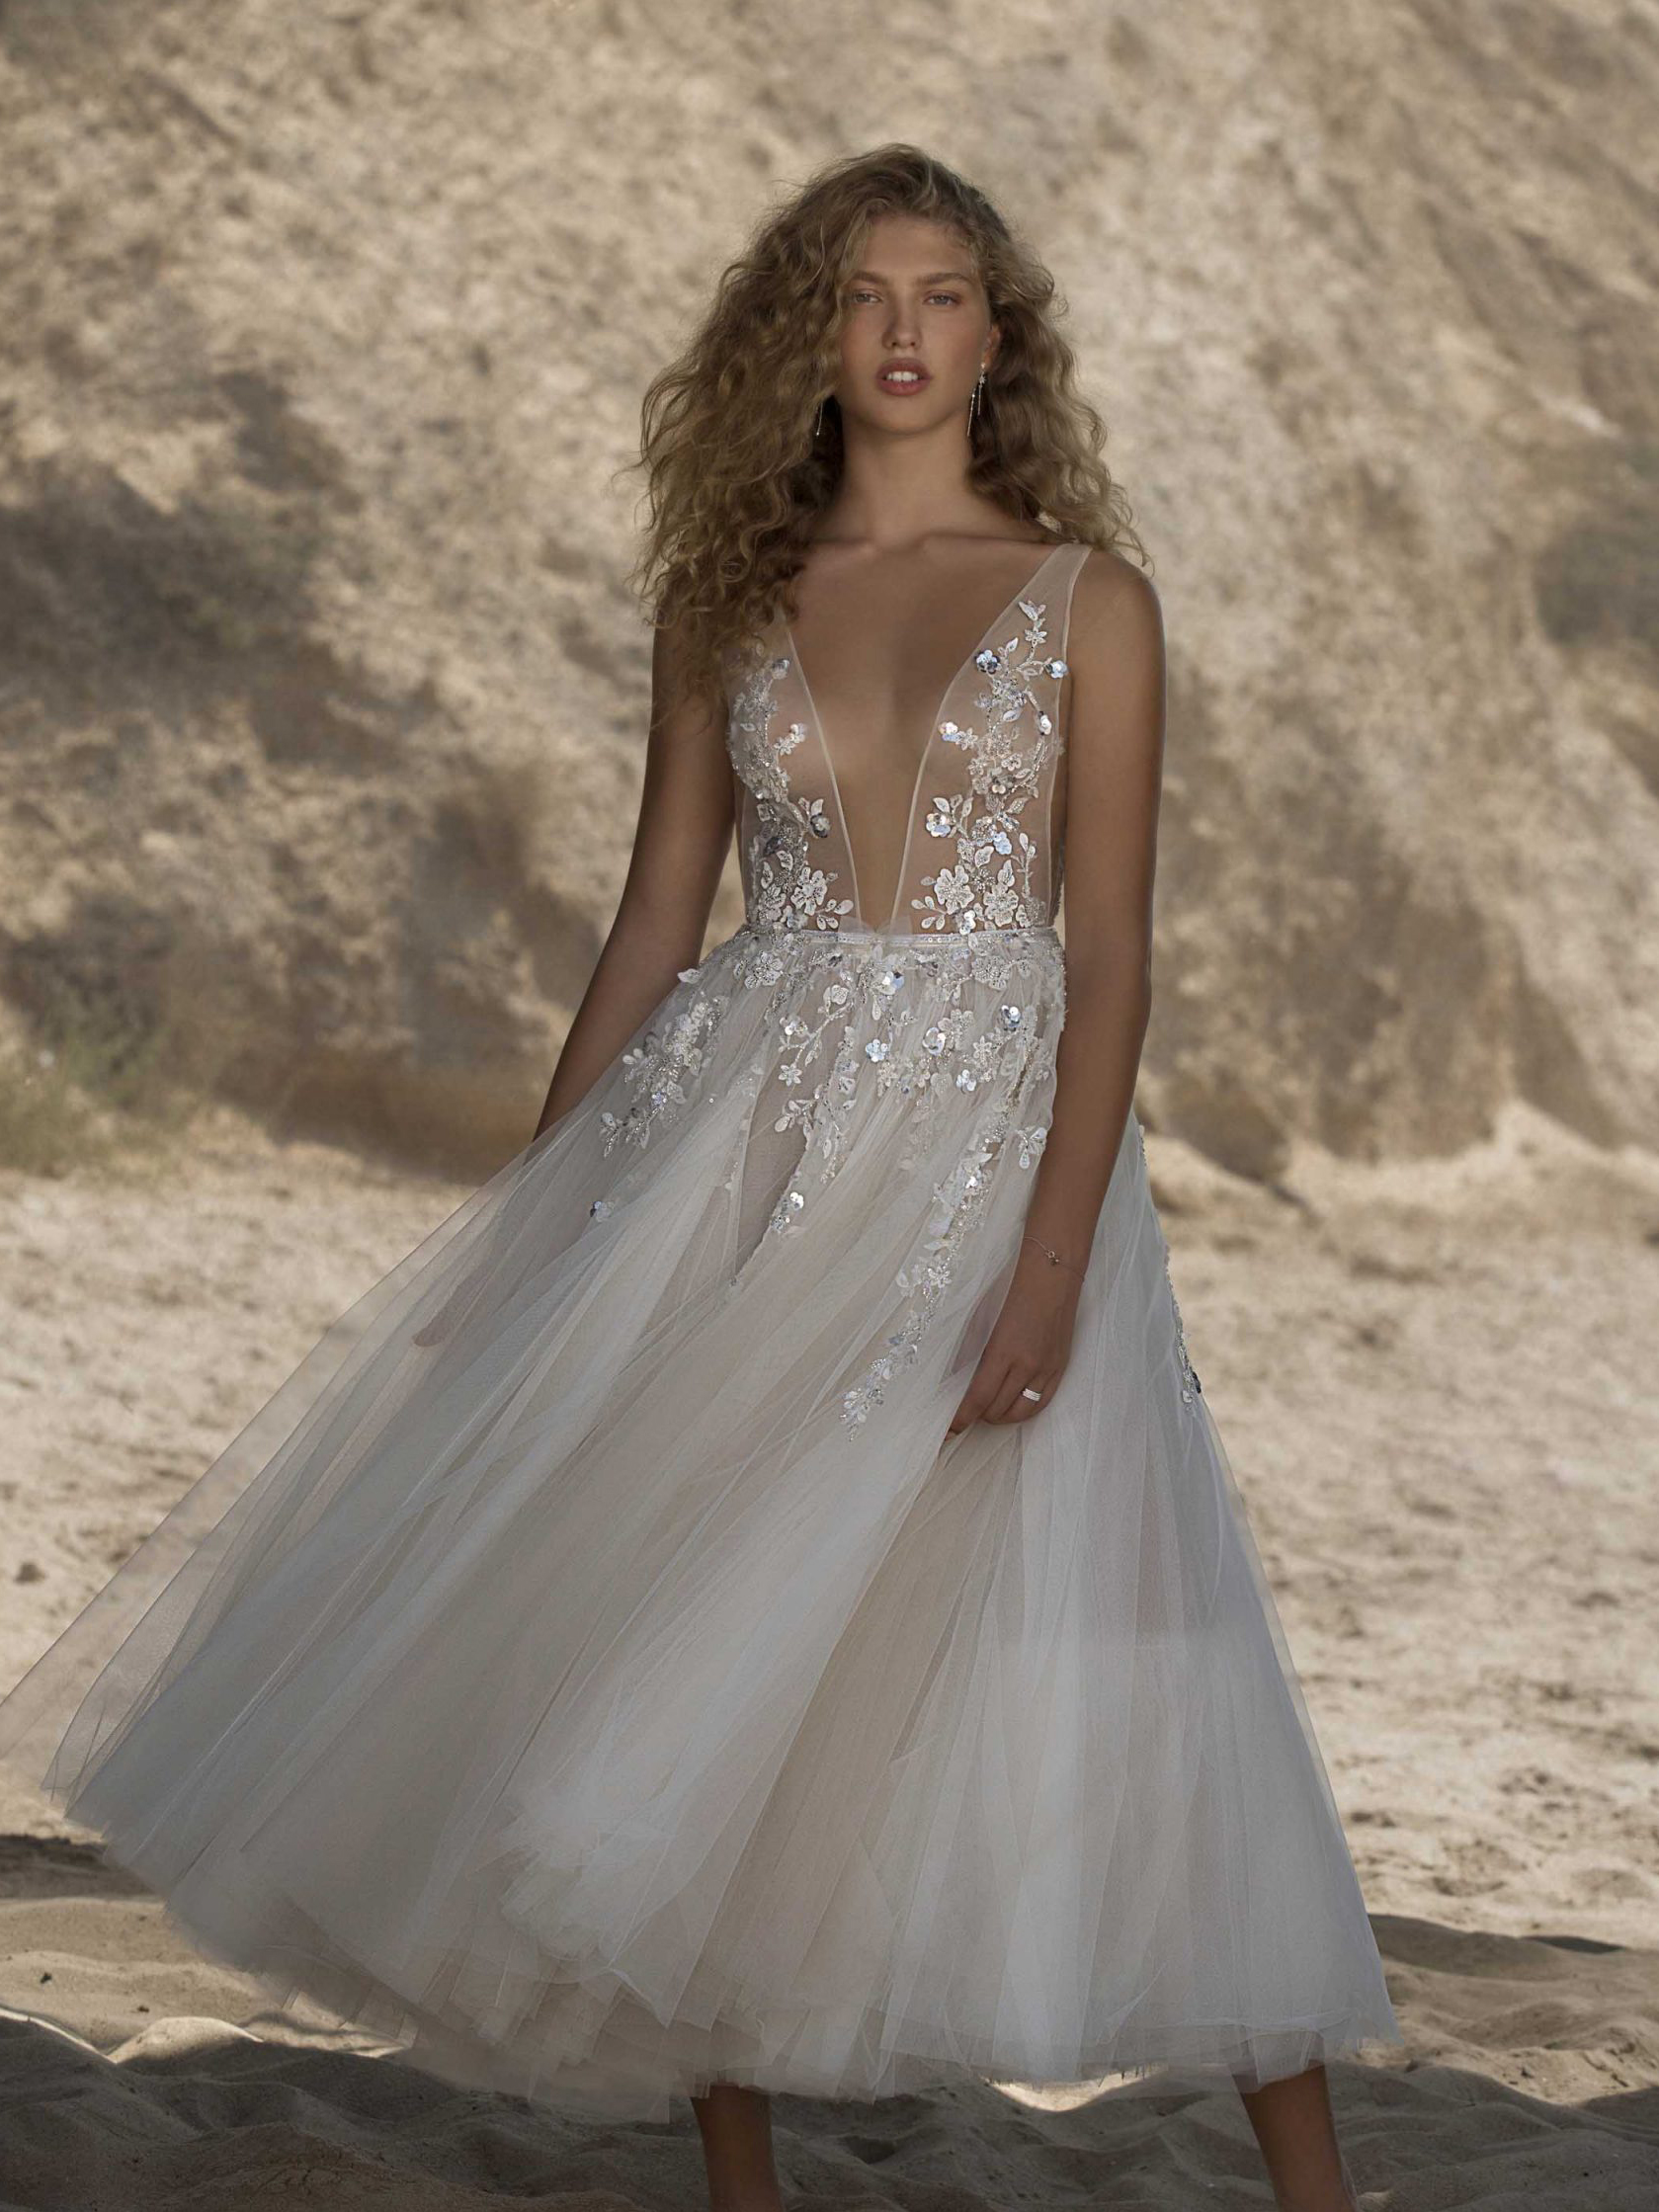 21-HILLARY Bridal Dress Inspirated By Berta Muse 2021 Vista Mare Collection